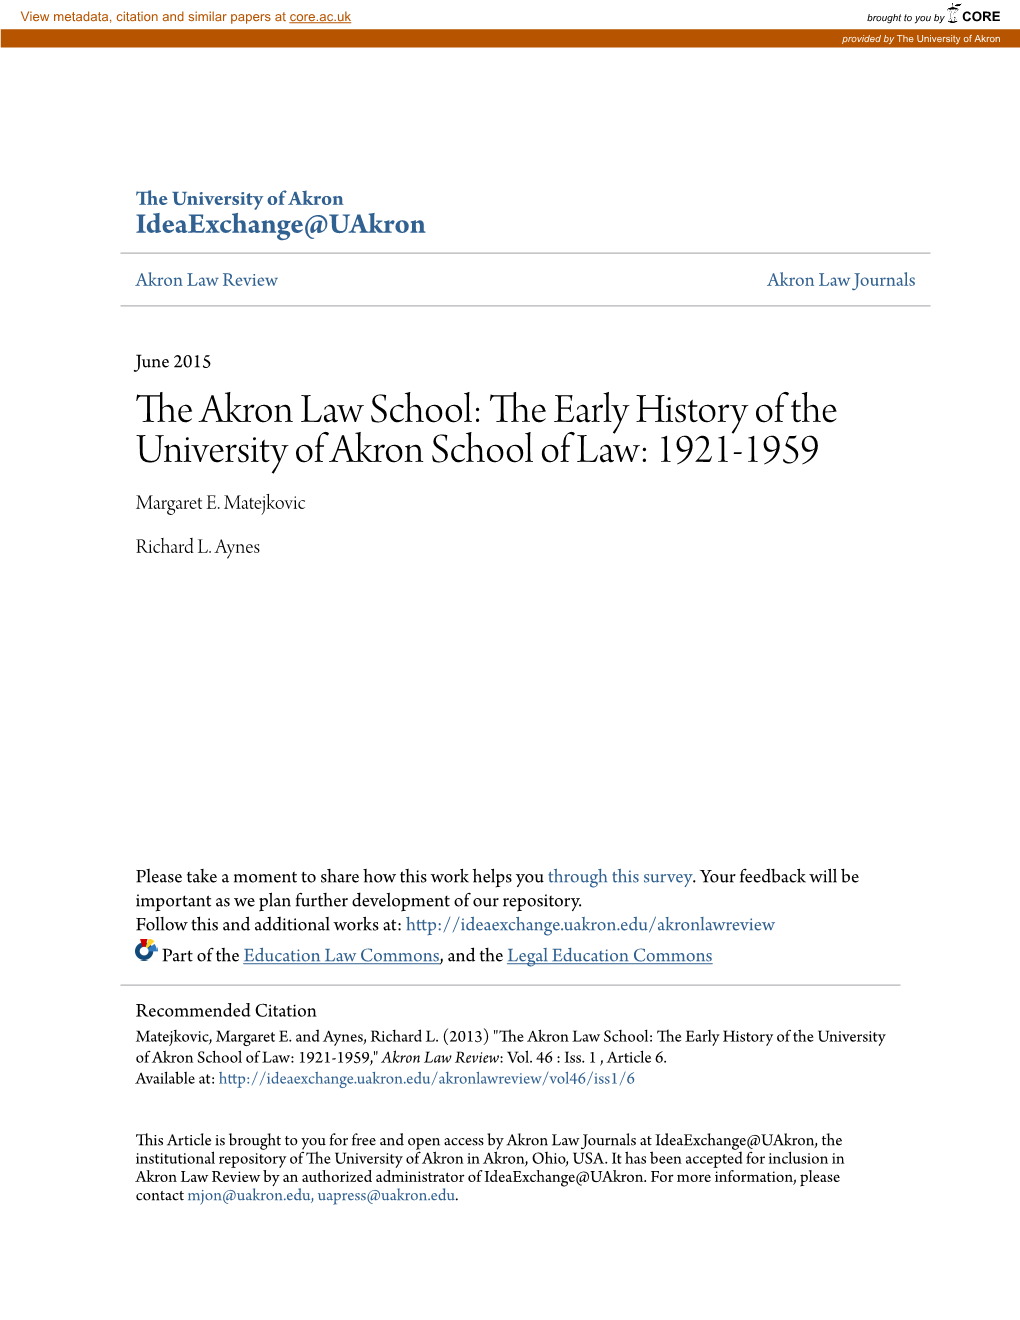 The Akron Law School: the Ae Rly History of the University of Akron School of Law: 1921-1959 Margaret E